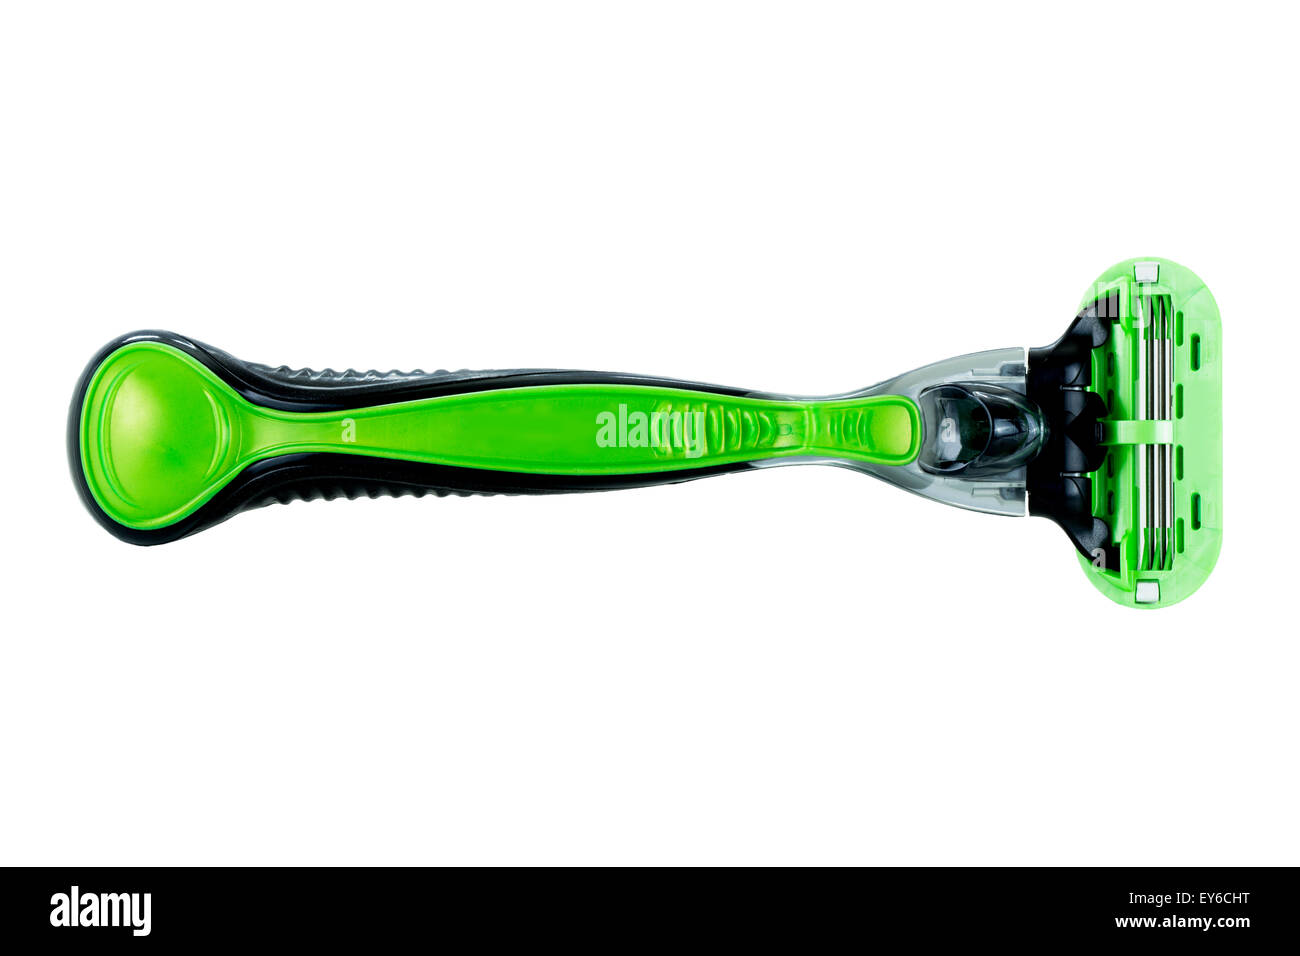 Close-up of a black & green men's razor, viewed from above, isolated on white background. Stock Photo